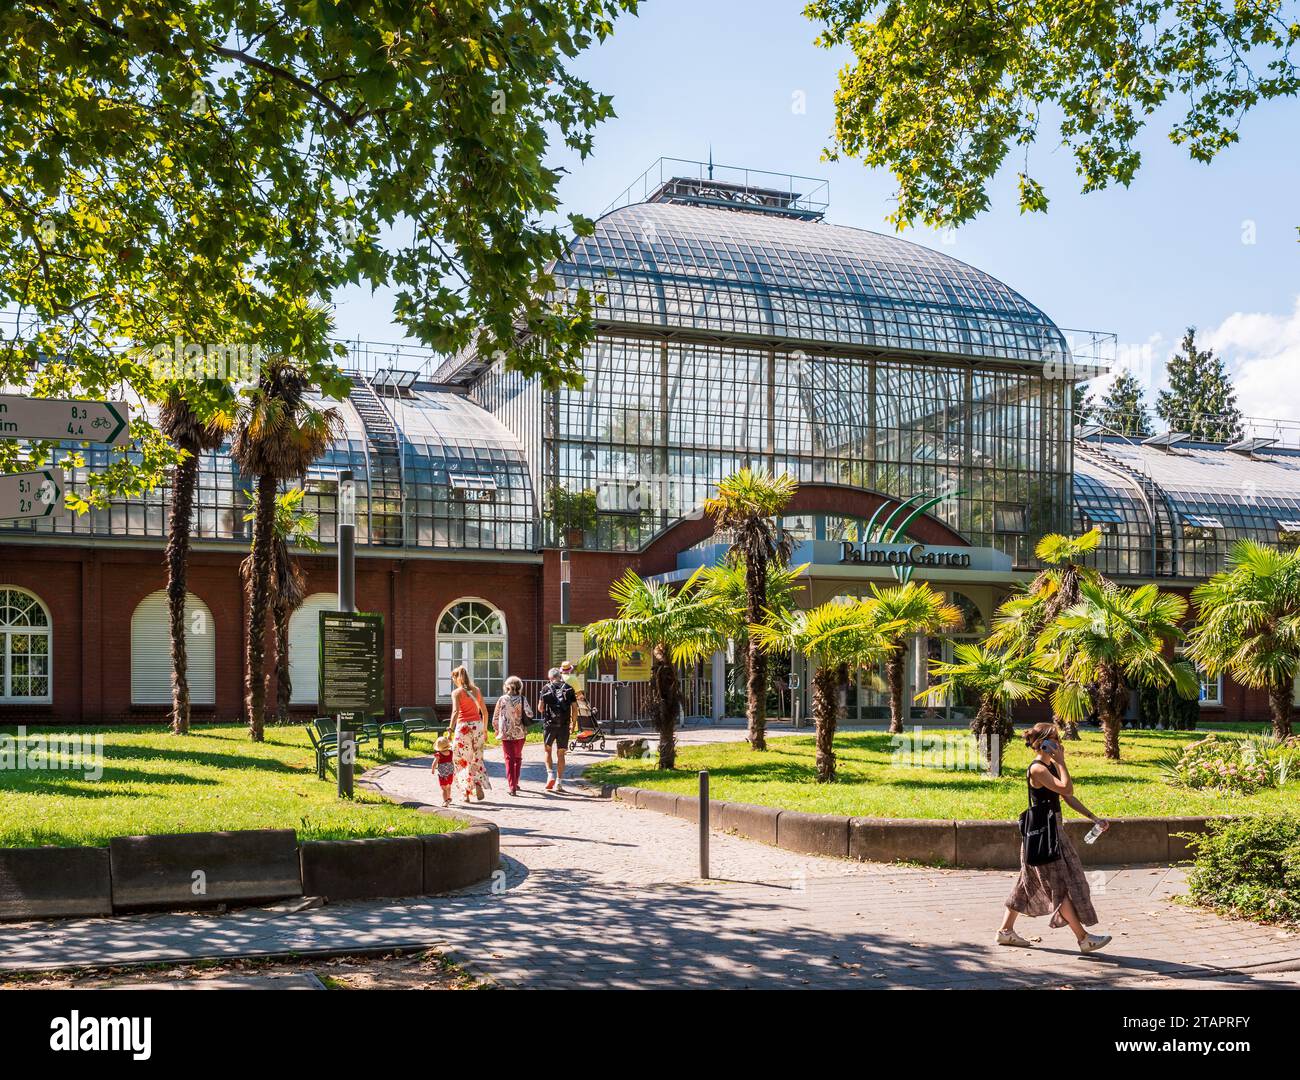 People head towards the main entrance of the Palmengarten in Frankfurt am Main, Germany, on a sunny summer afternoon. Stock Photo